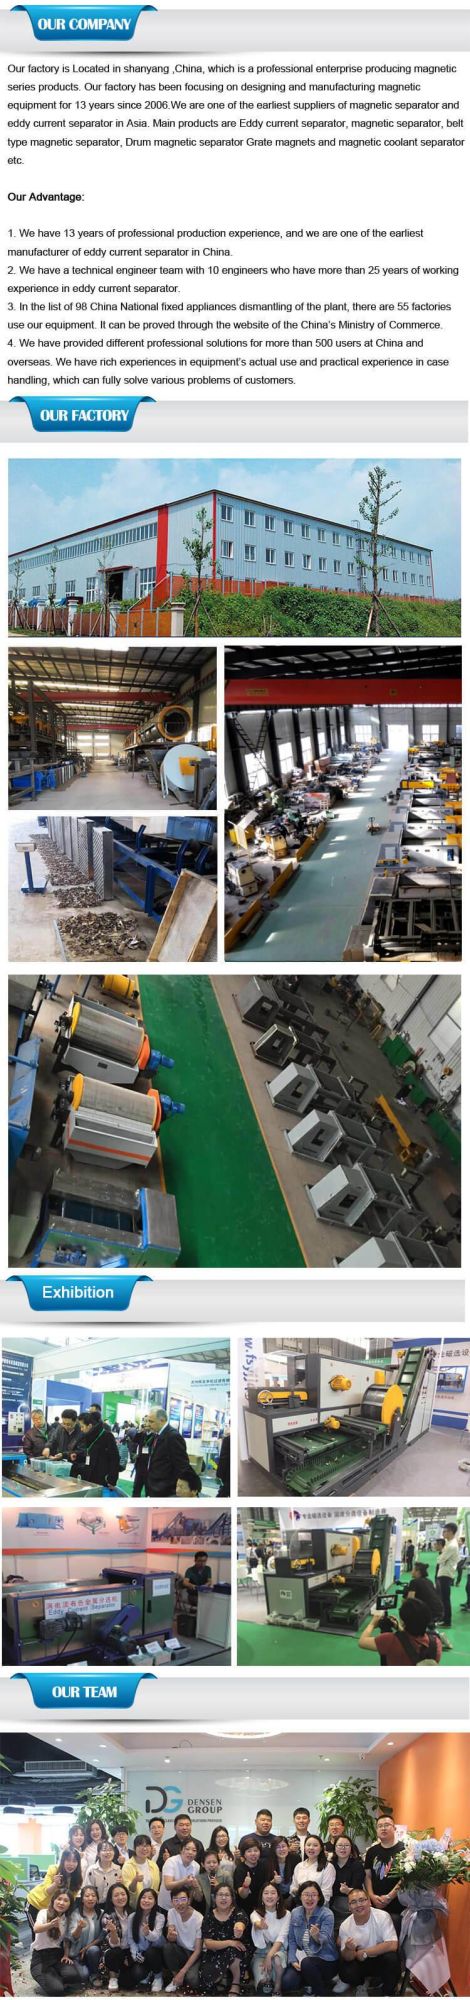 China Magnetic Roll Separator Machine, Permanent Roll Magnet Separator